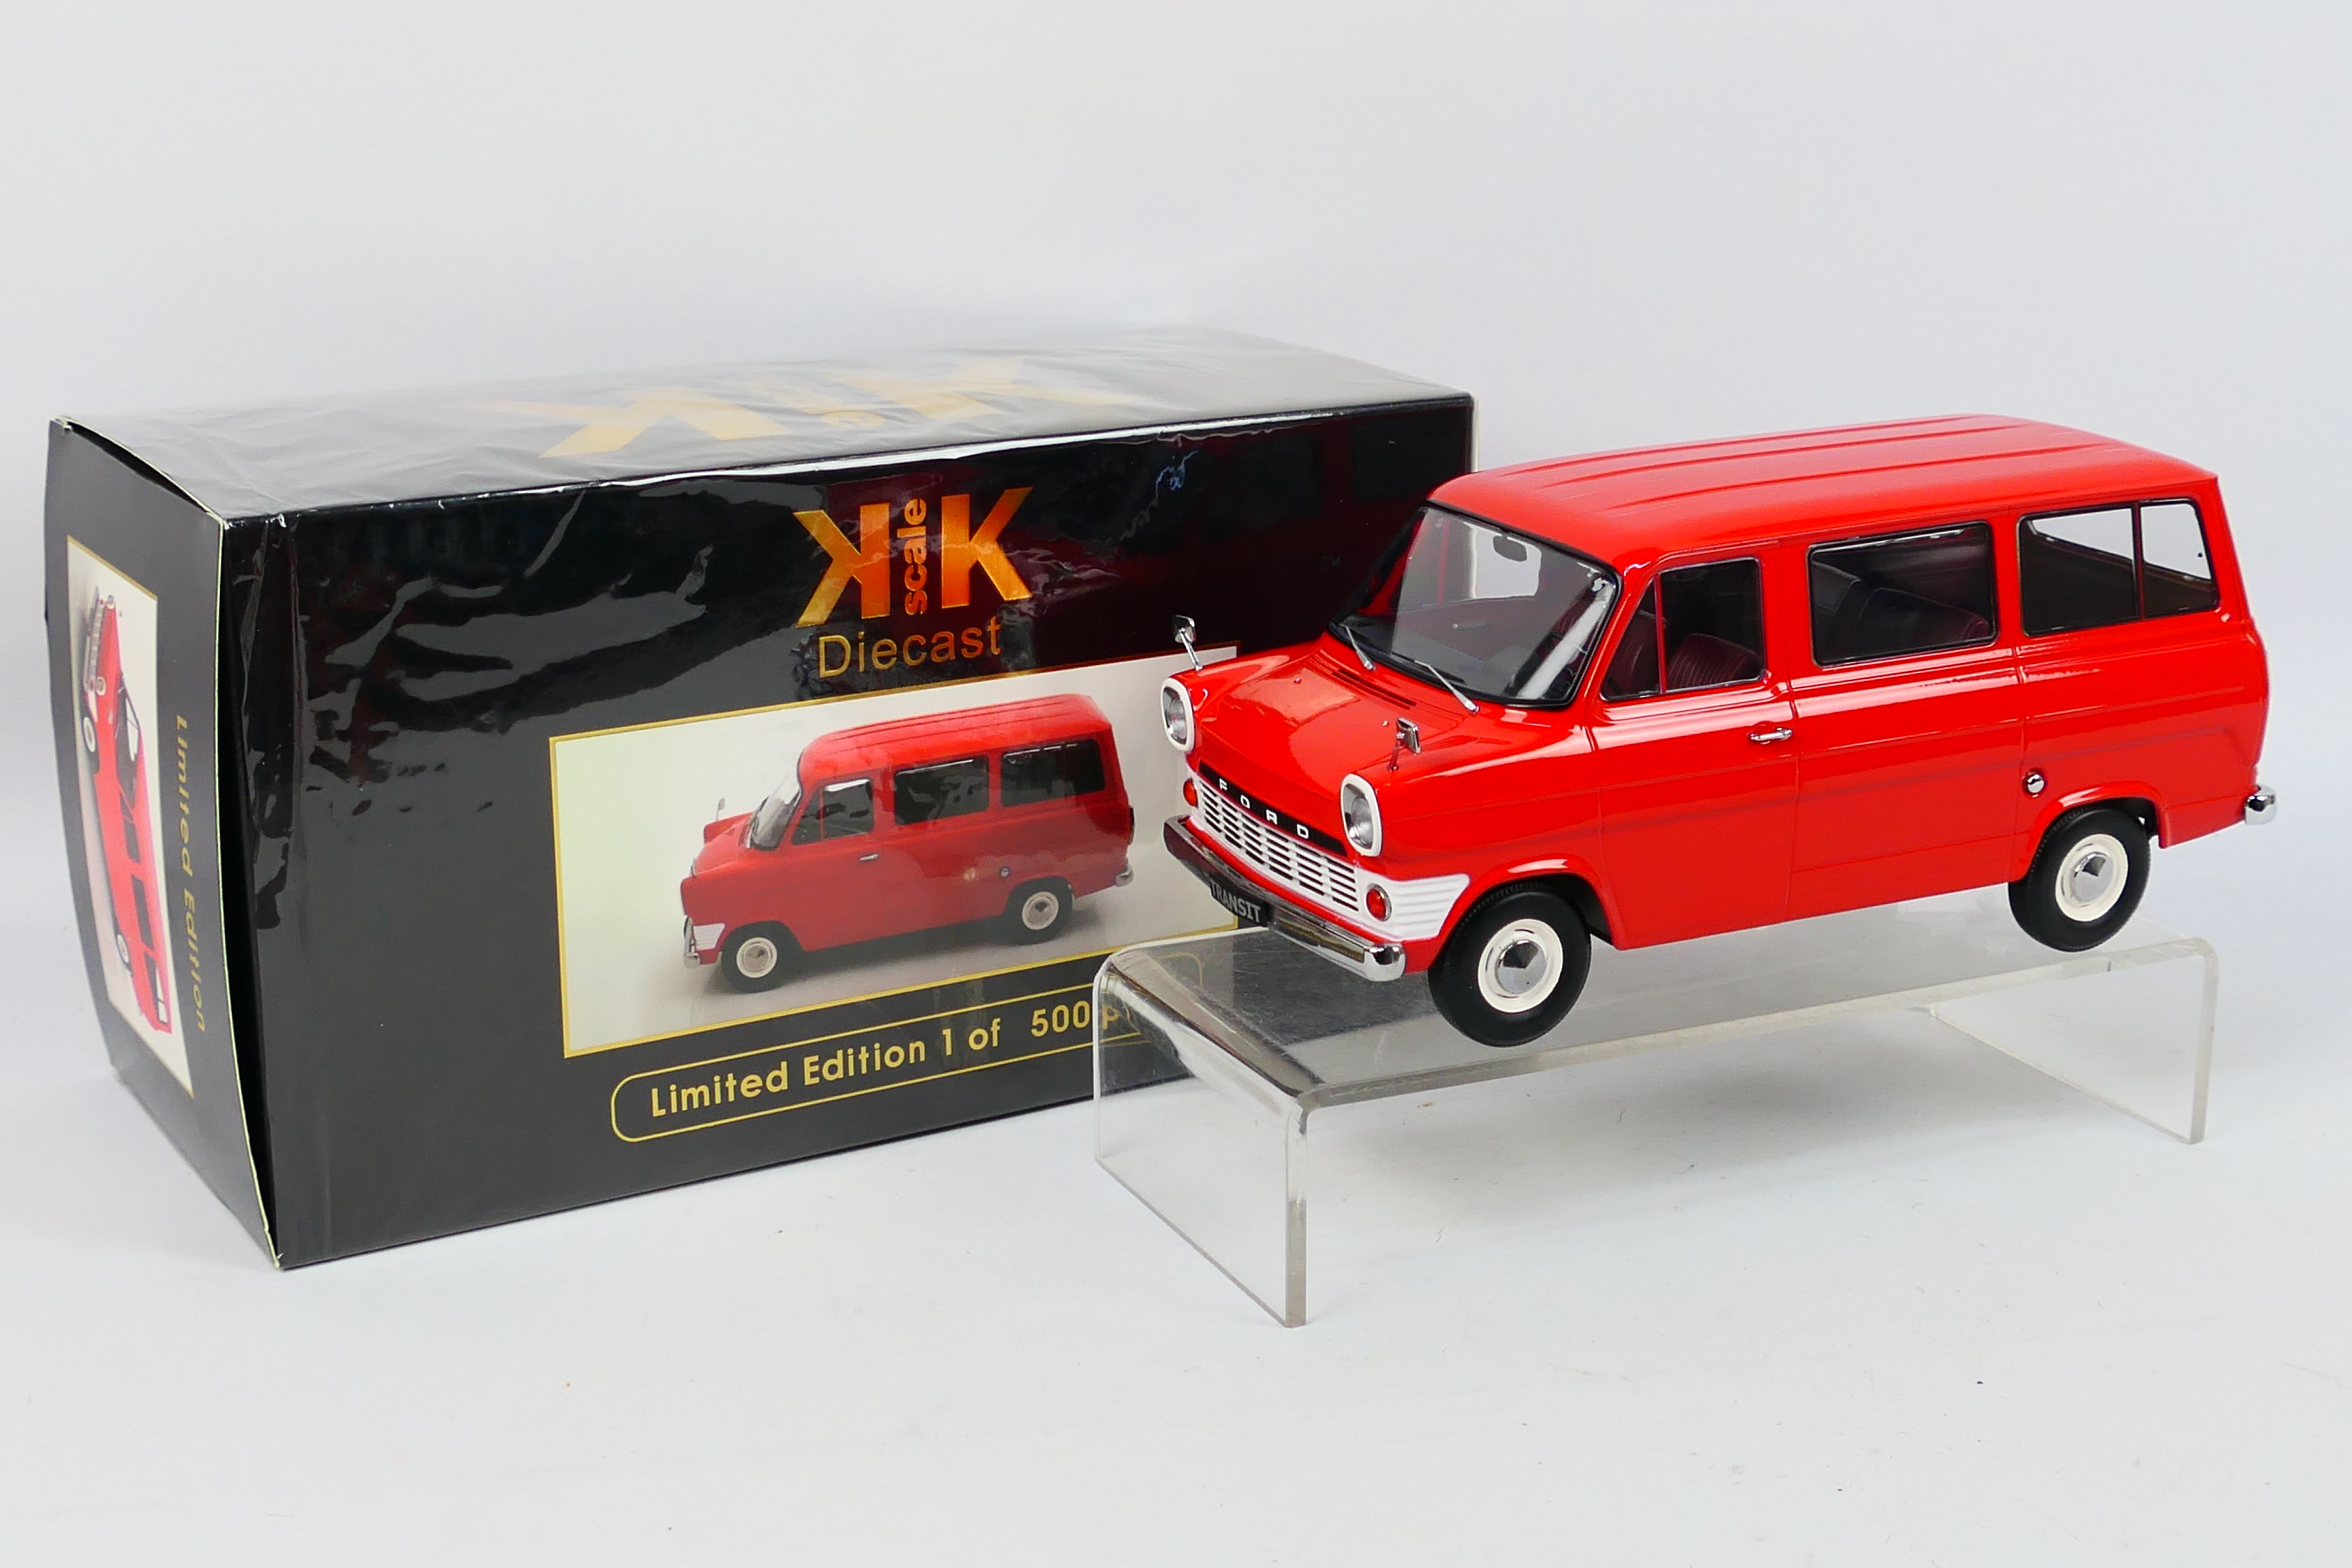 KK scale - A boxed Limited Edition 1:18 scale KK SCale #KKDC180463 1965 Ford Transit Bus.